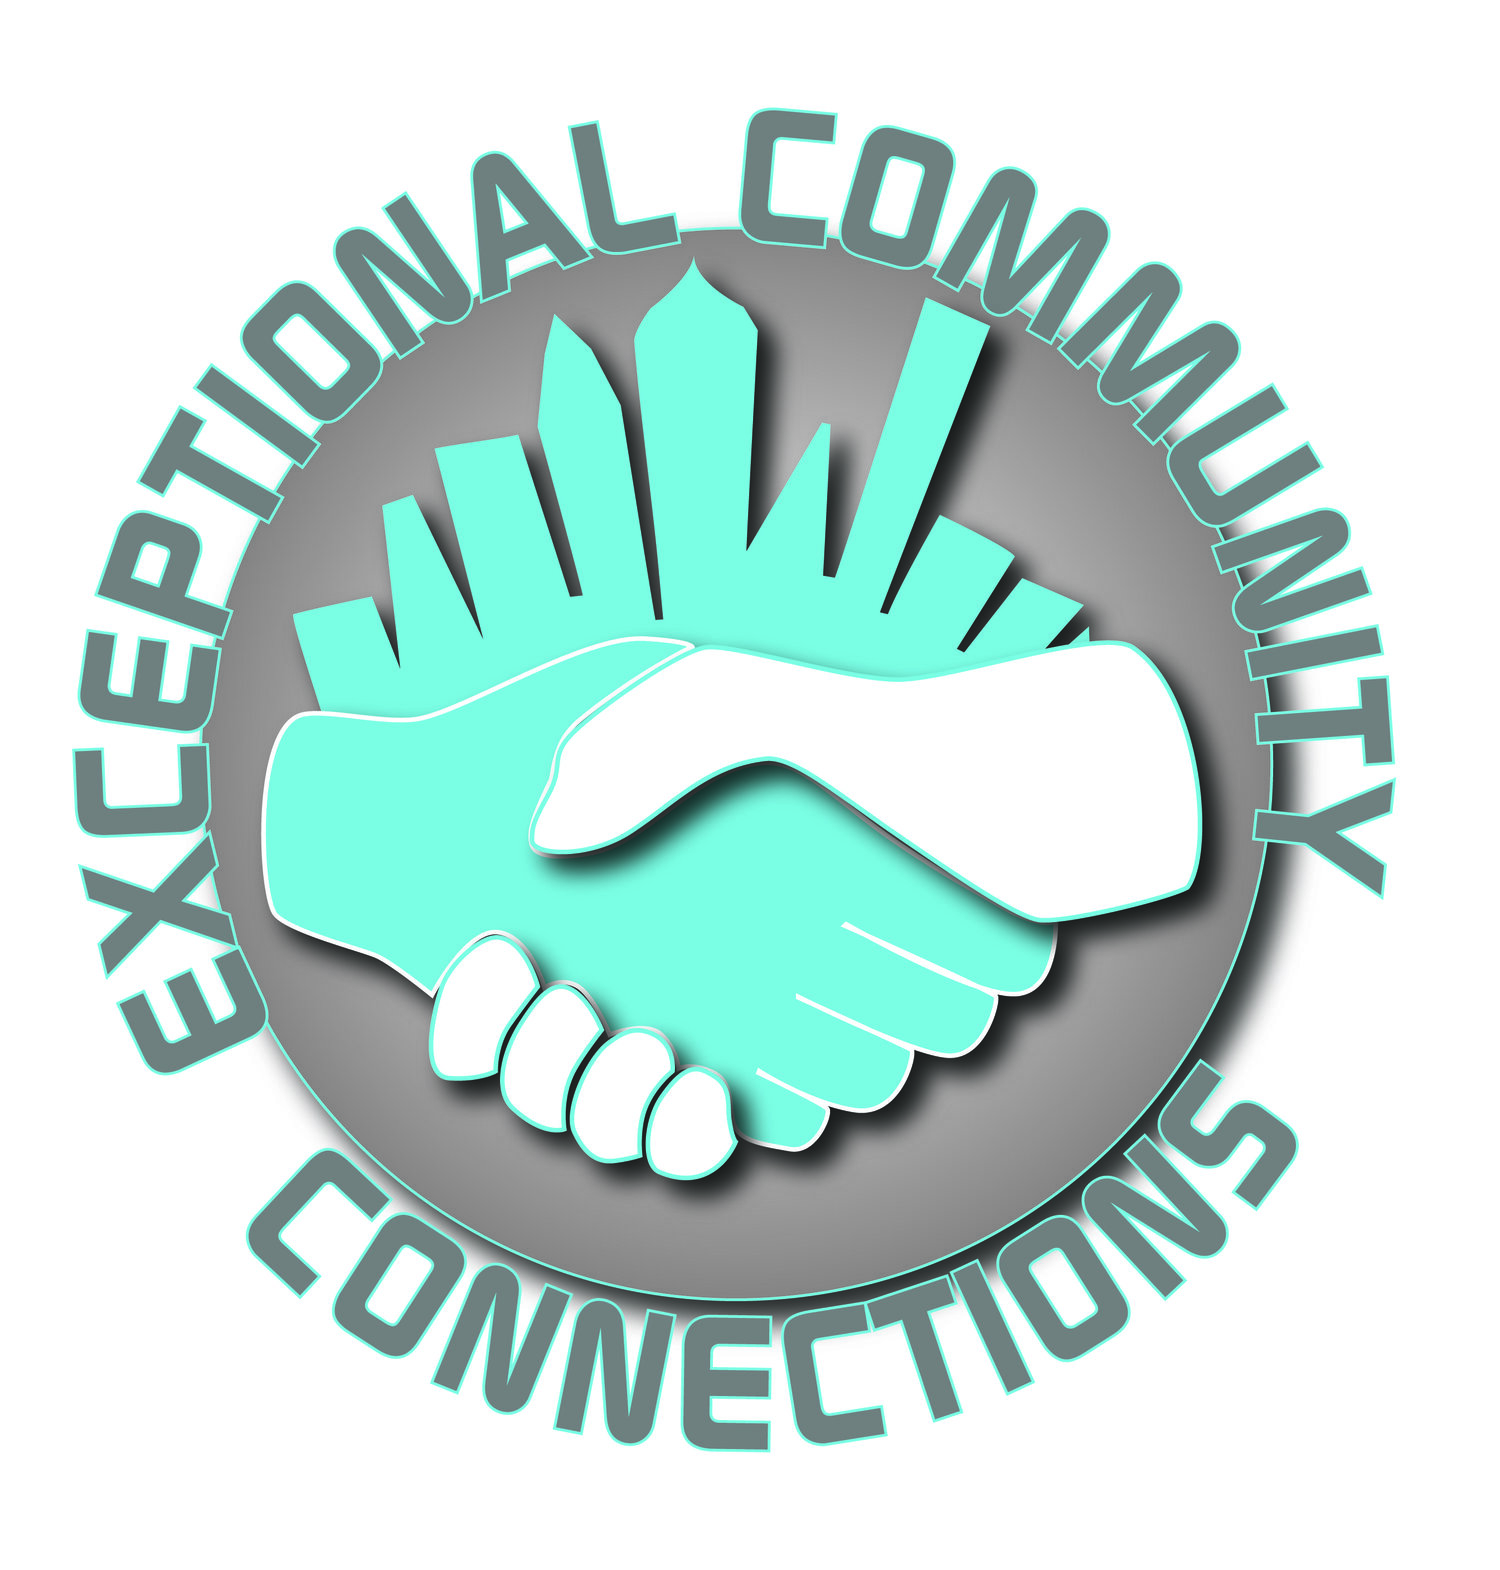 Exceptional Community Connections